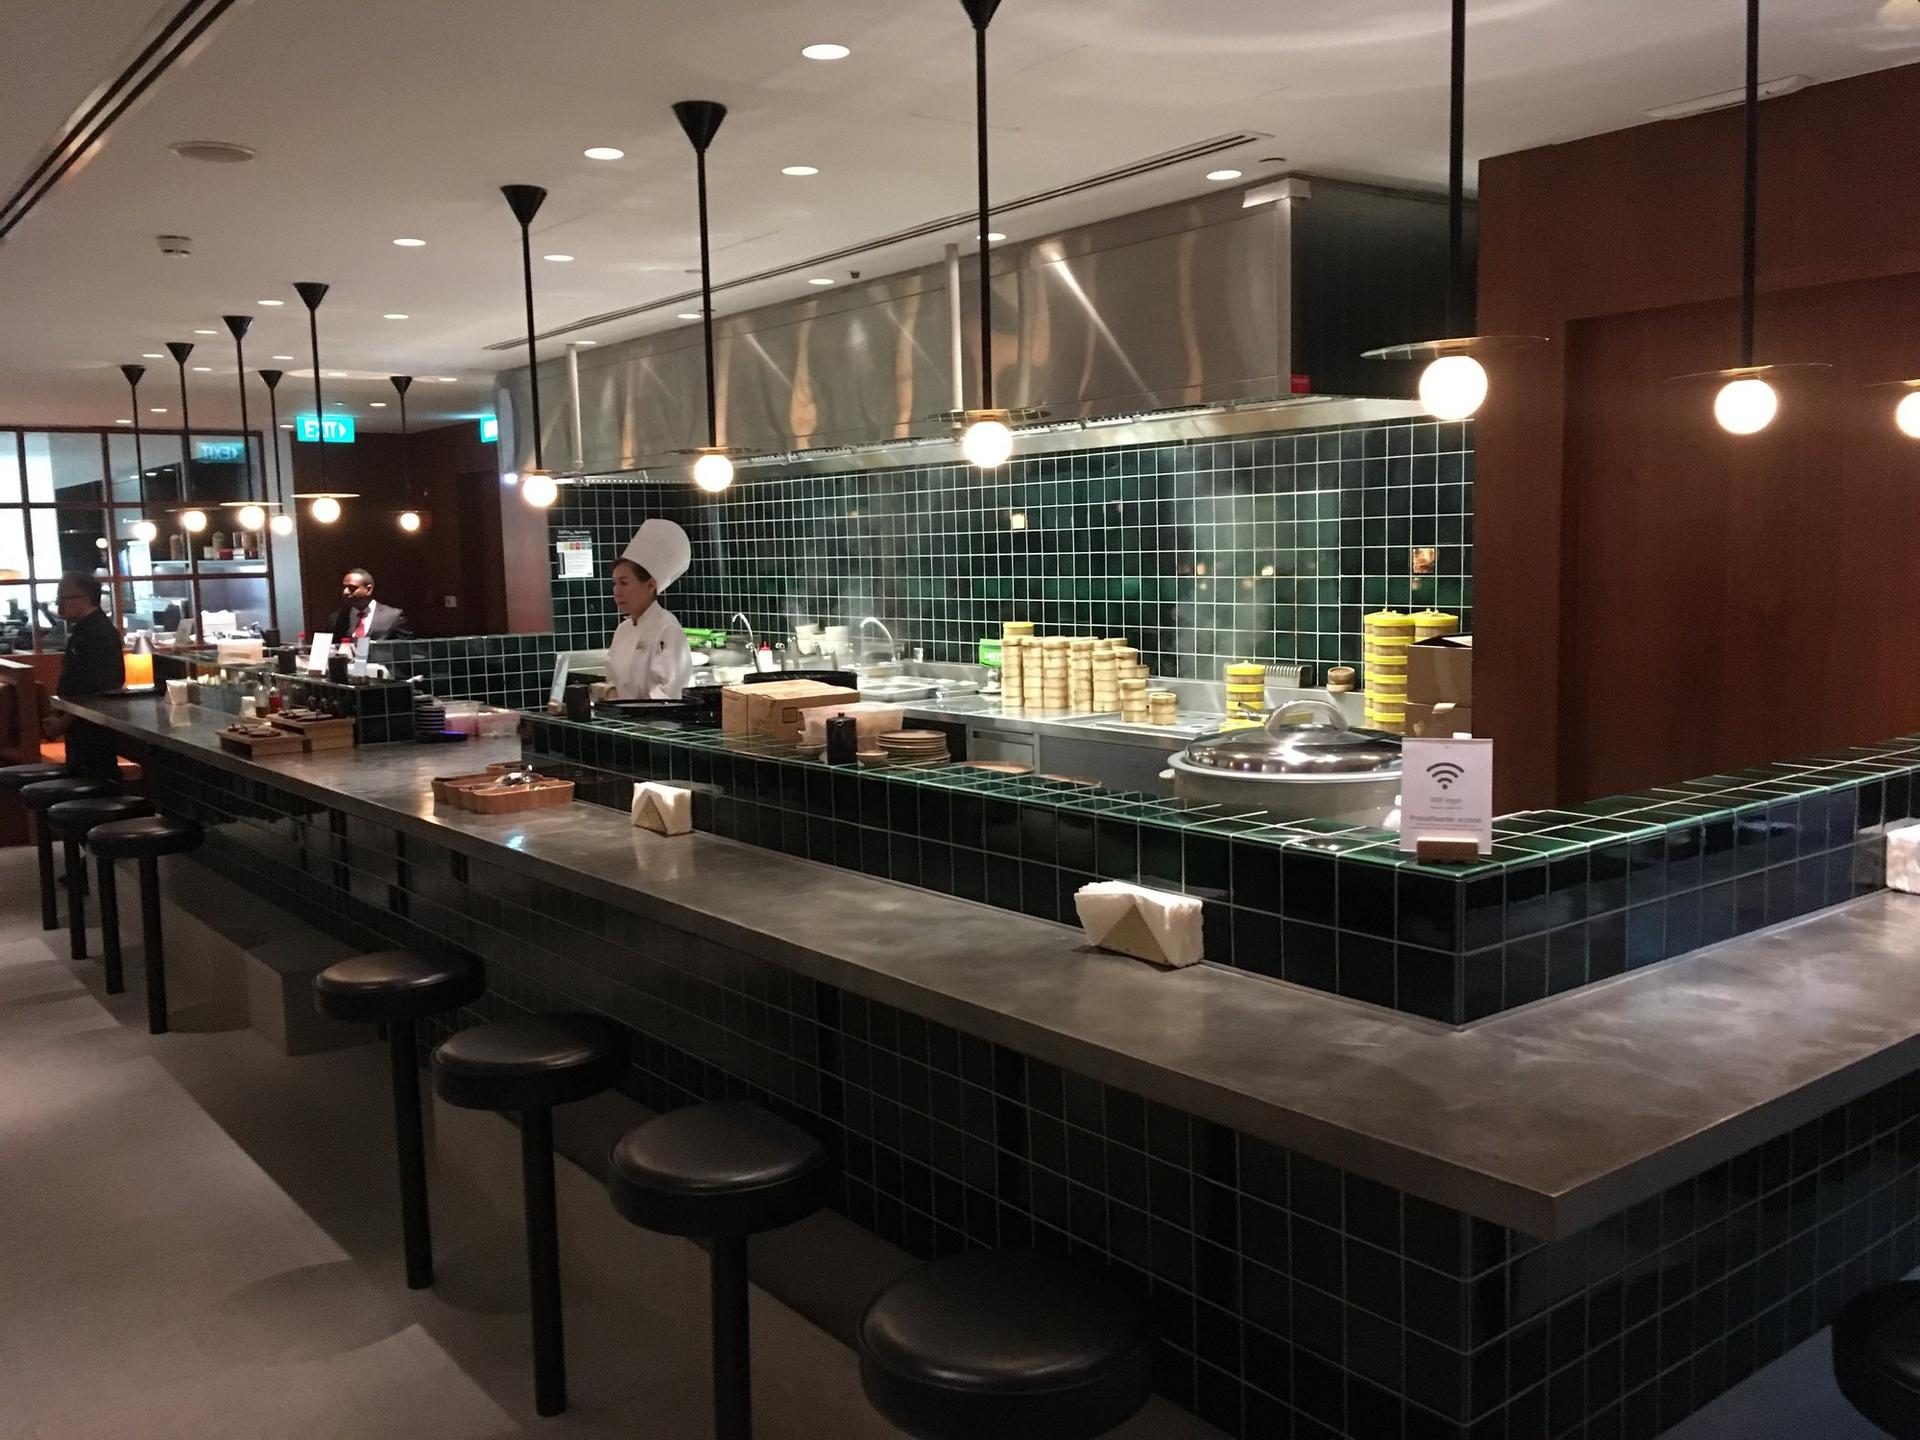 Cathay Pacific Lounge image 38 of 60